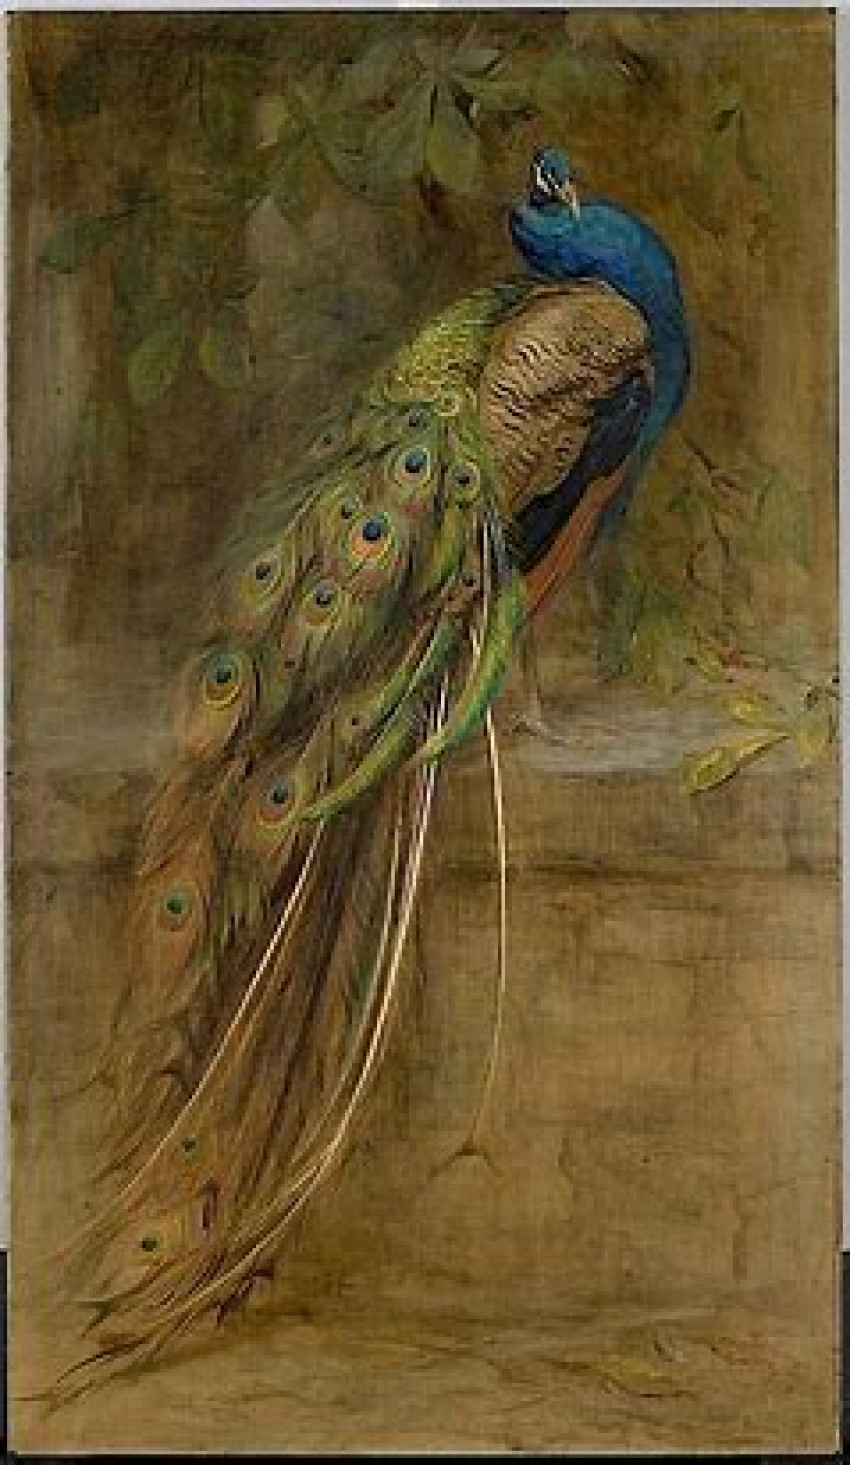 From Palette to Plumage: The Artistry of Peacock Paintings